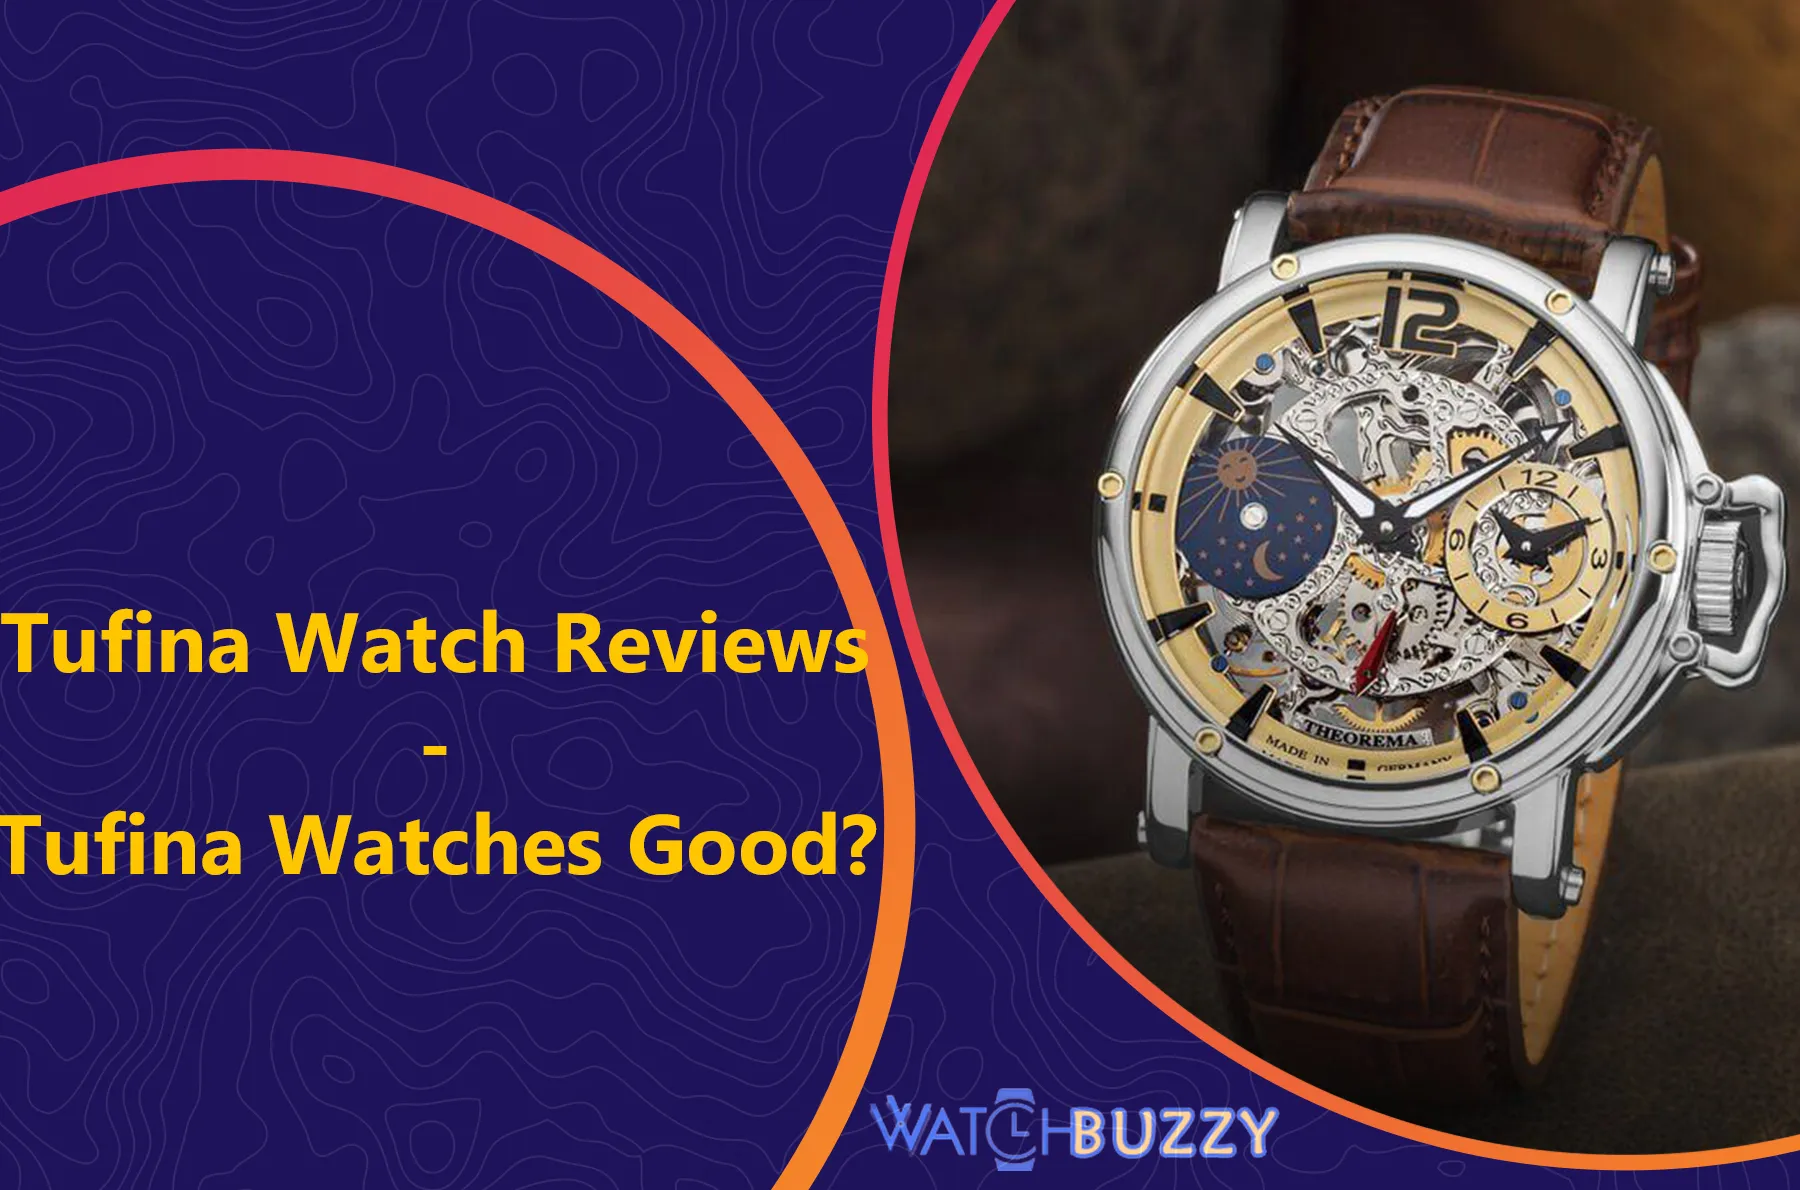 Tufina Watch Reviews - Are Tufina Watches Good?